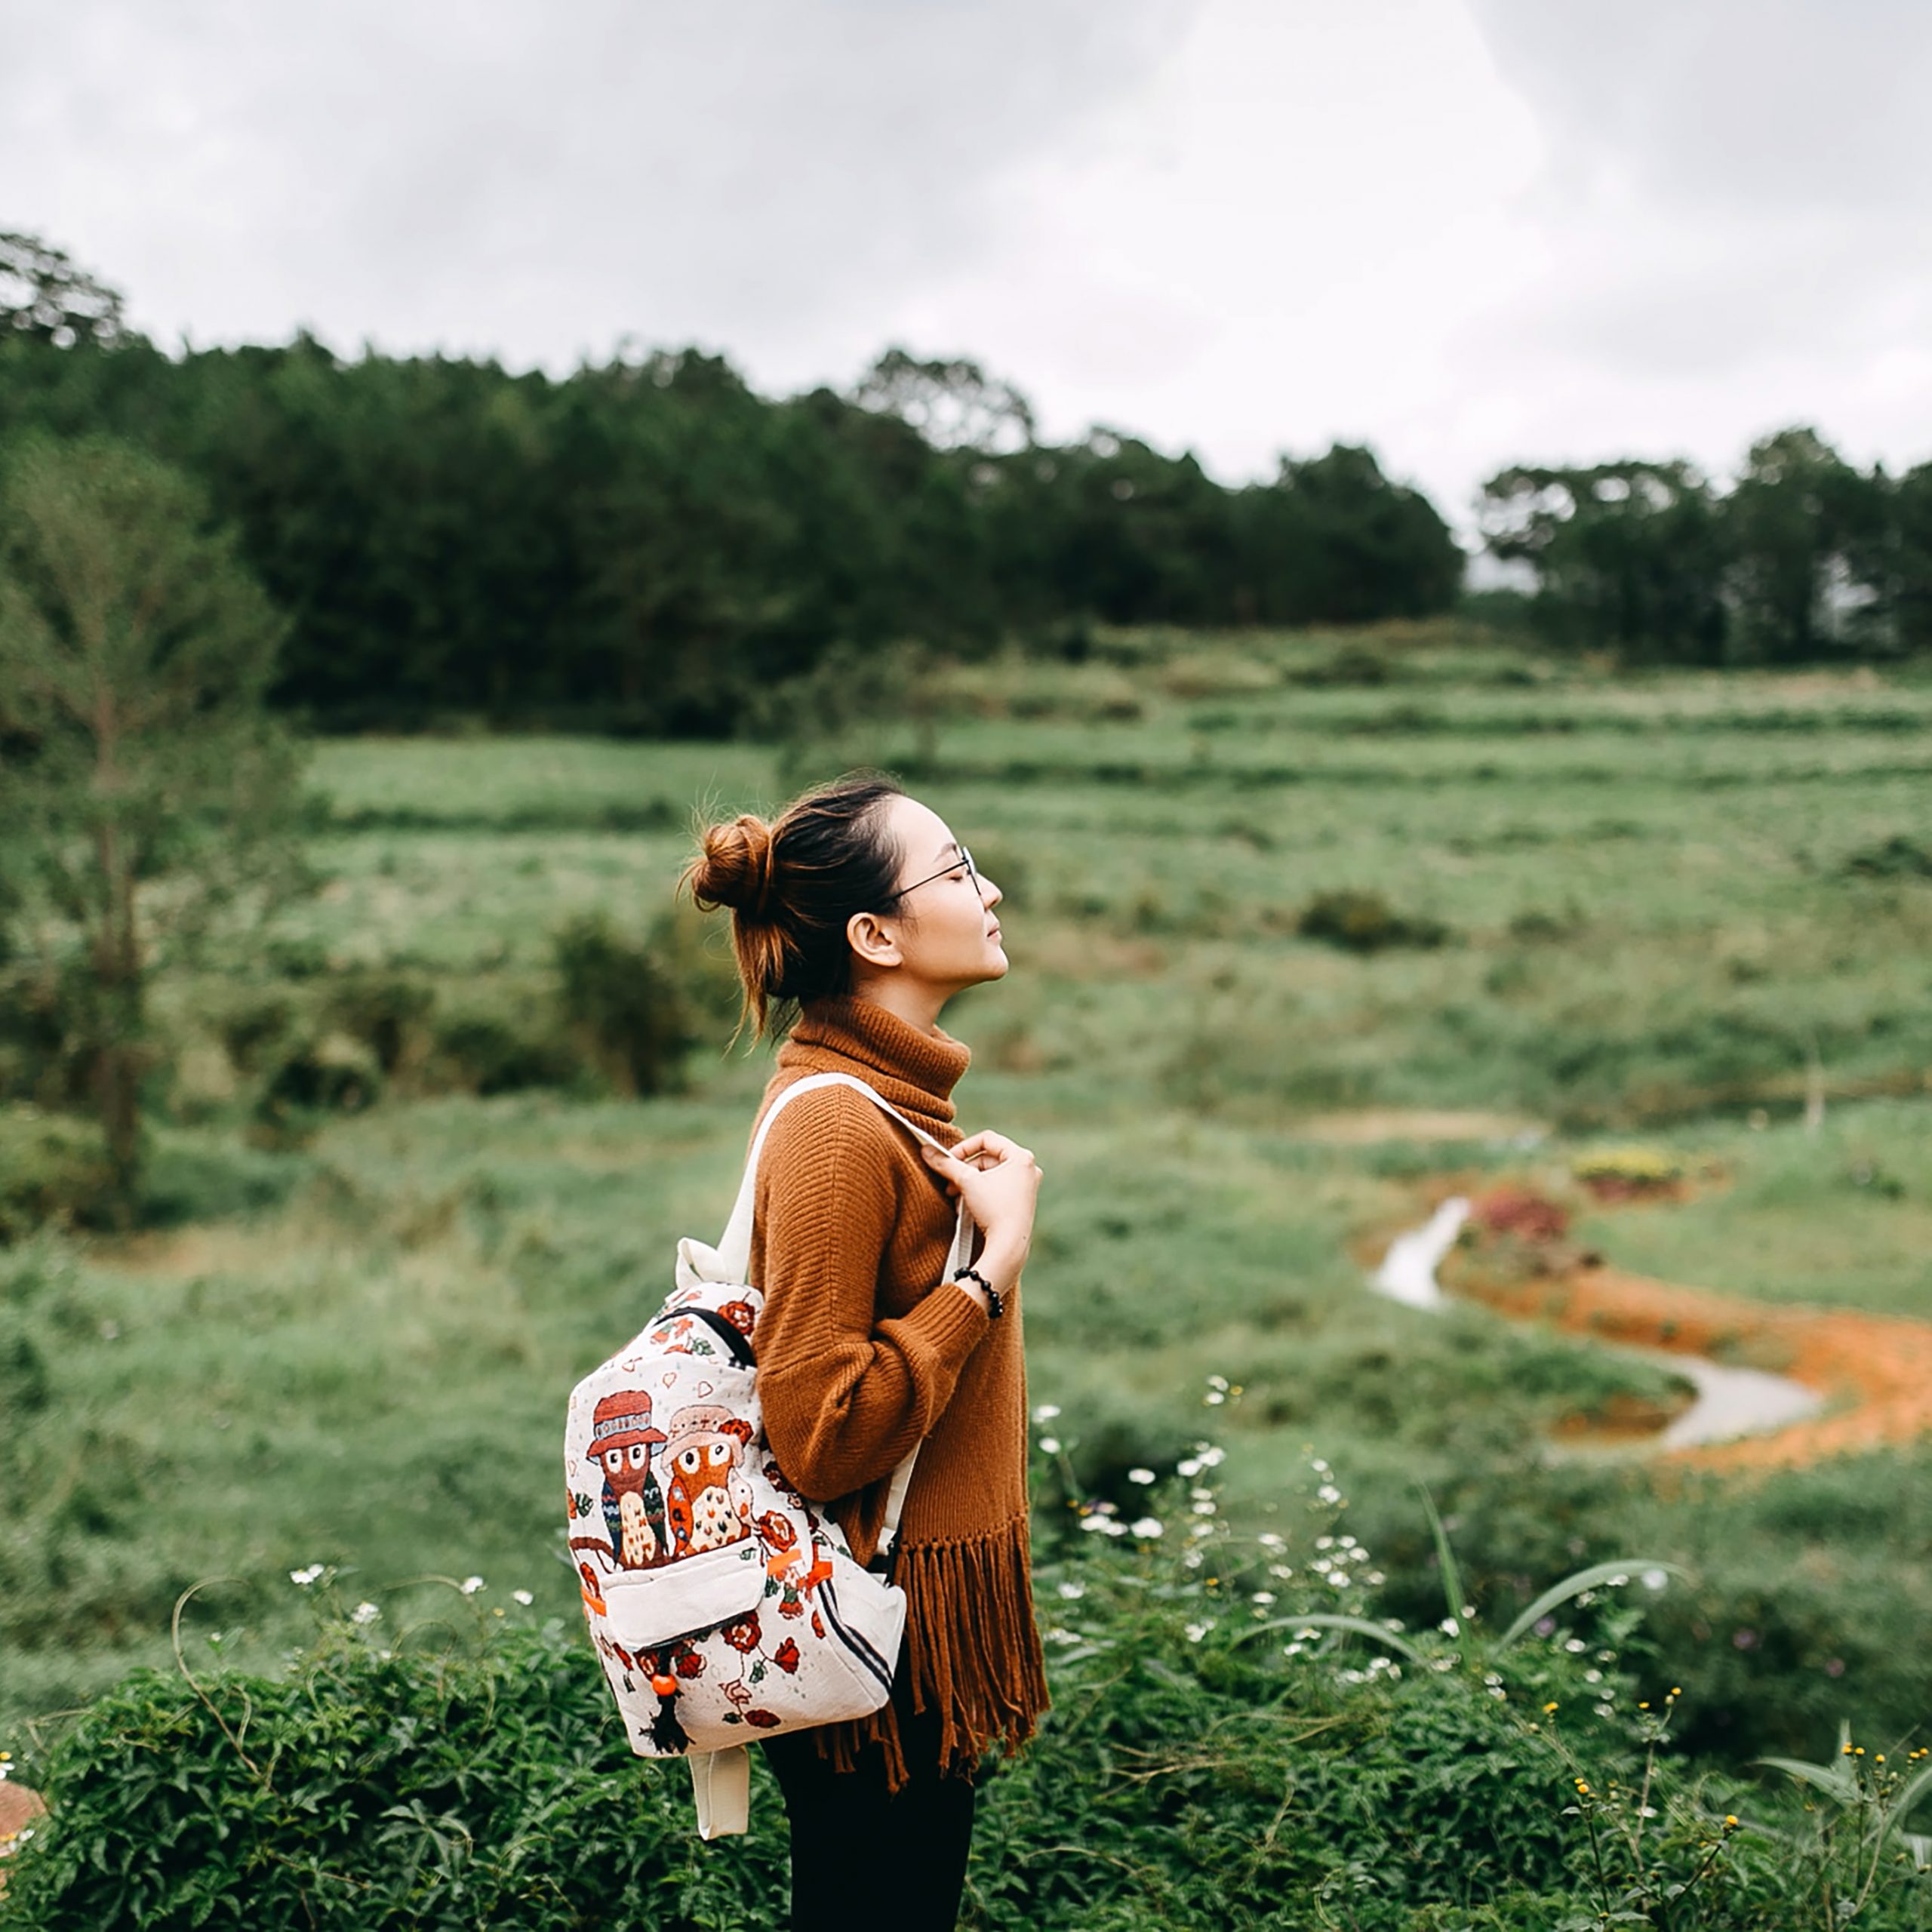 7 Tricks and Tips for the Solo Female Traveller